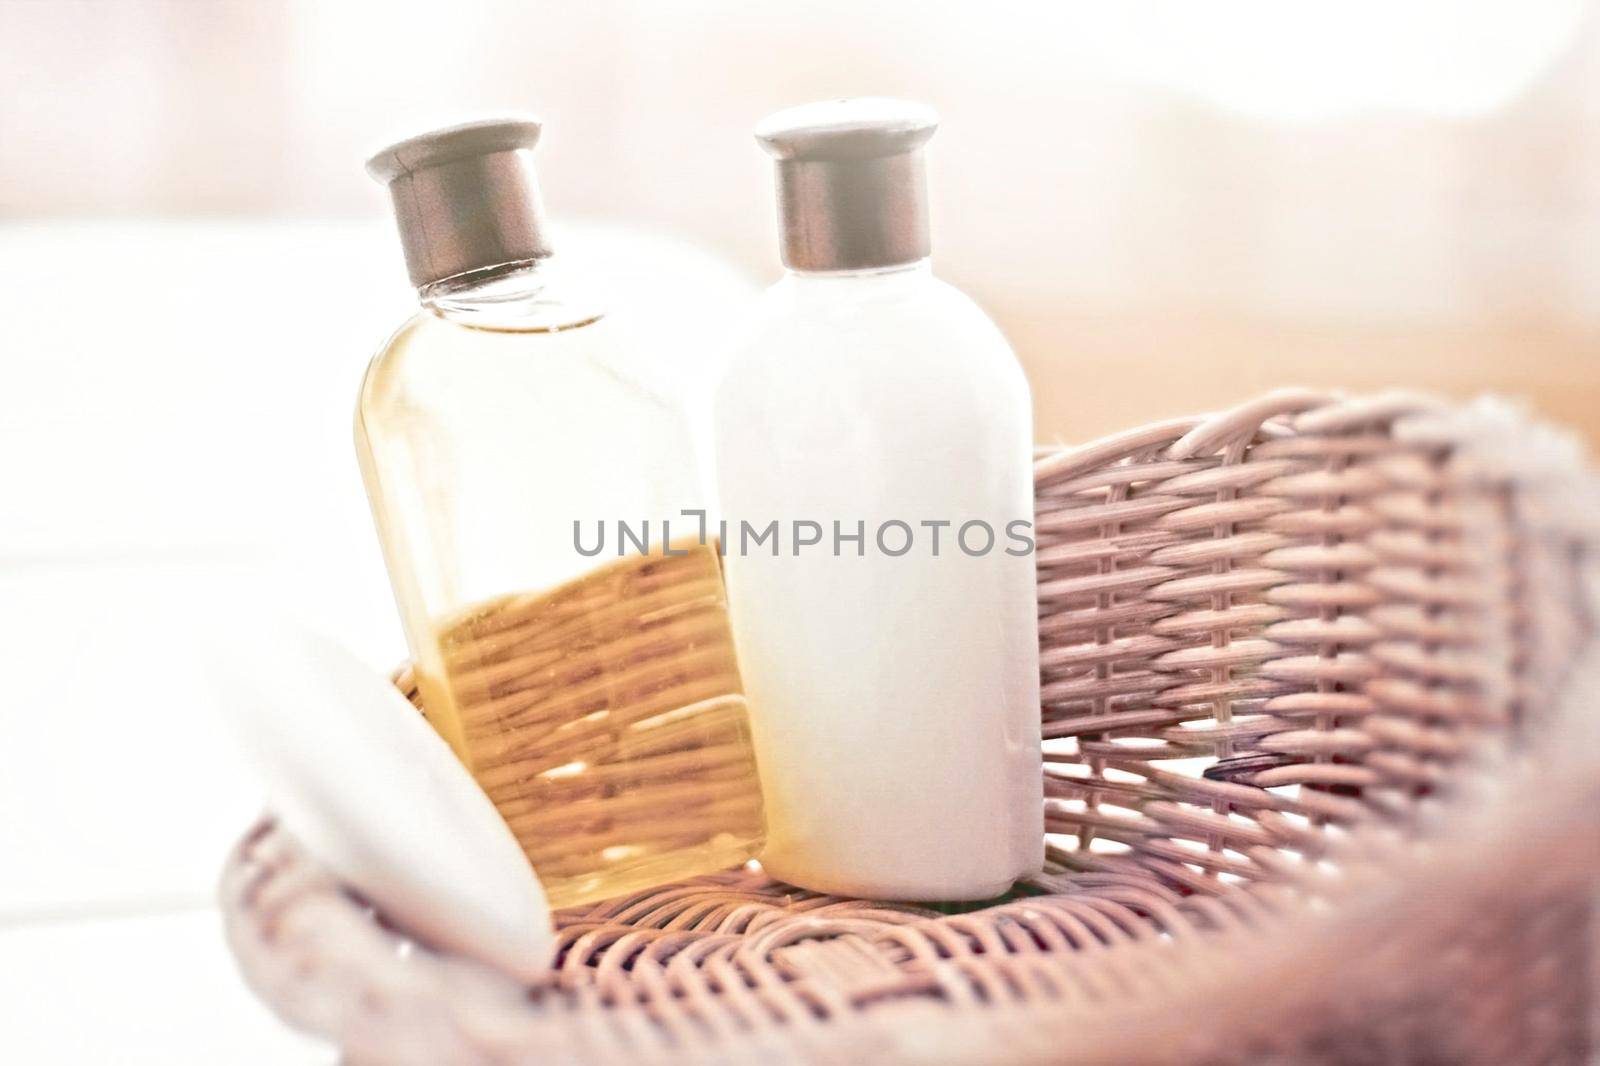 Organic cosmetic products - body care, spa treatment and clean beauty concept. Bathroom essentials for her